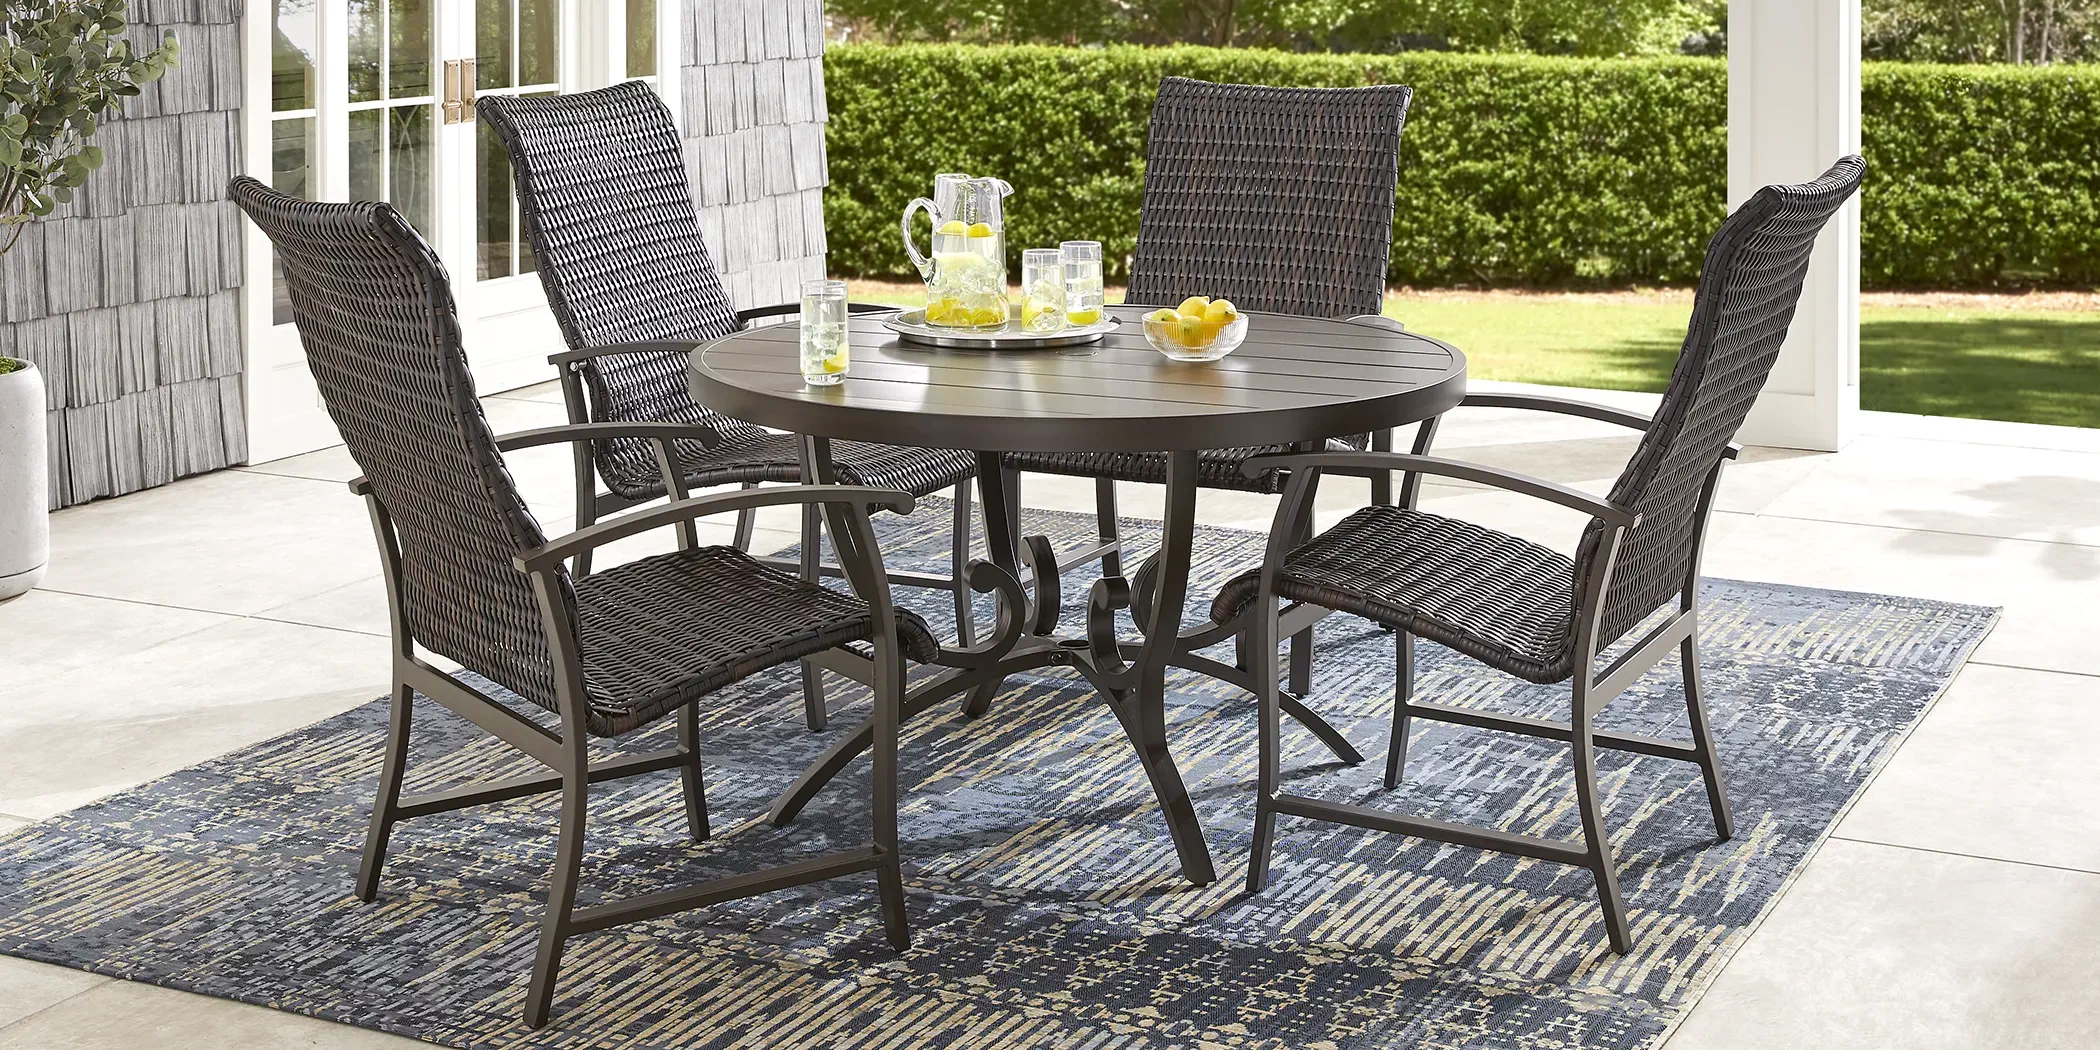 black and wicker patio dining